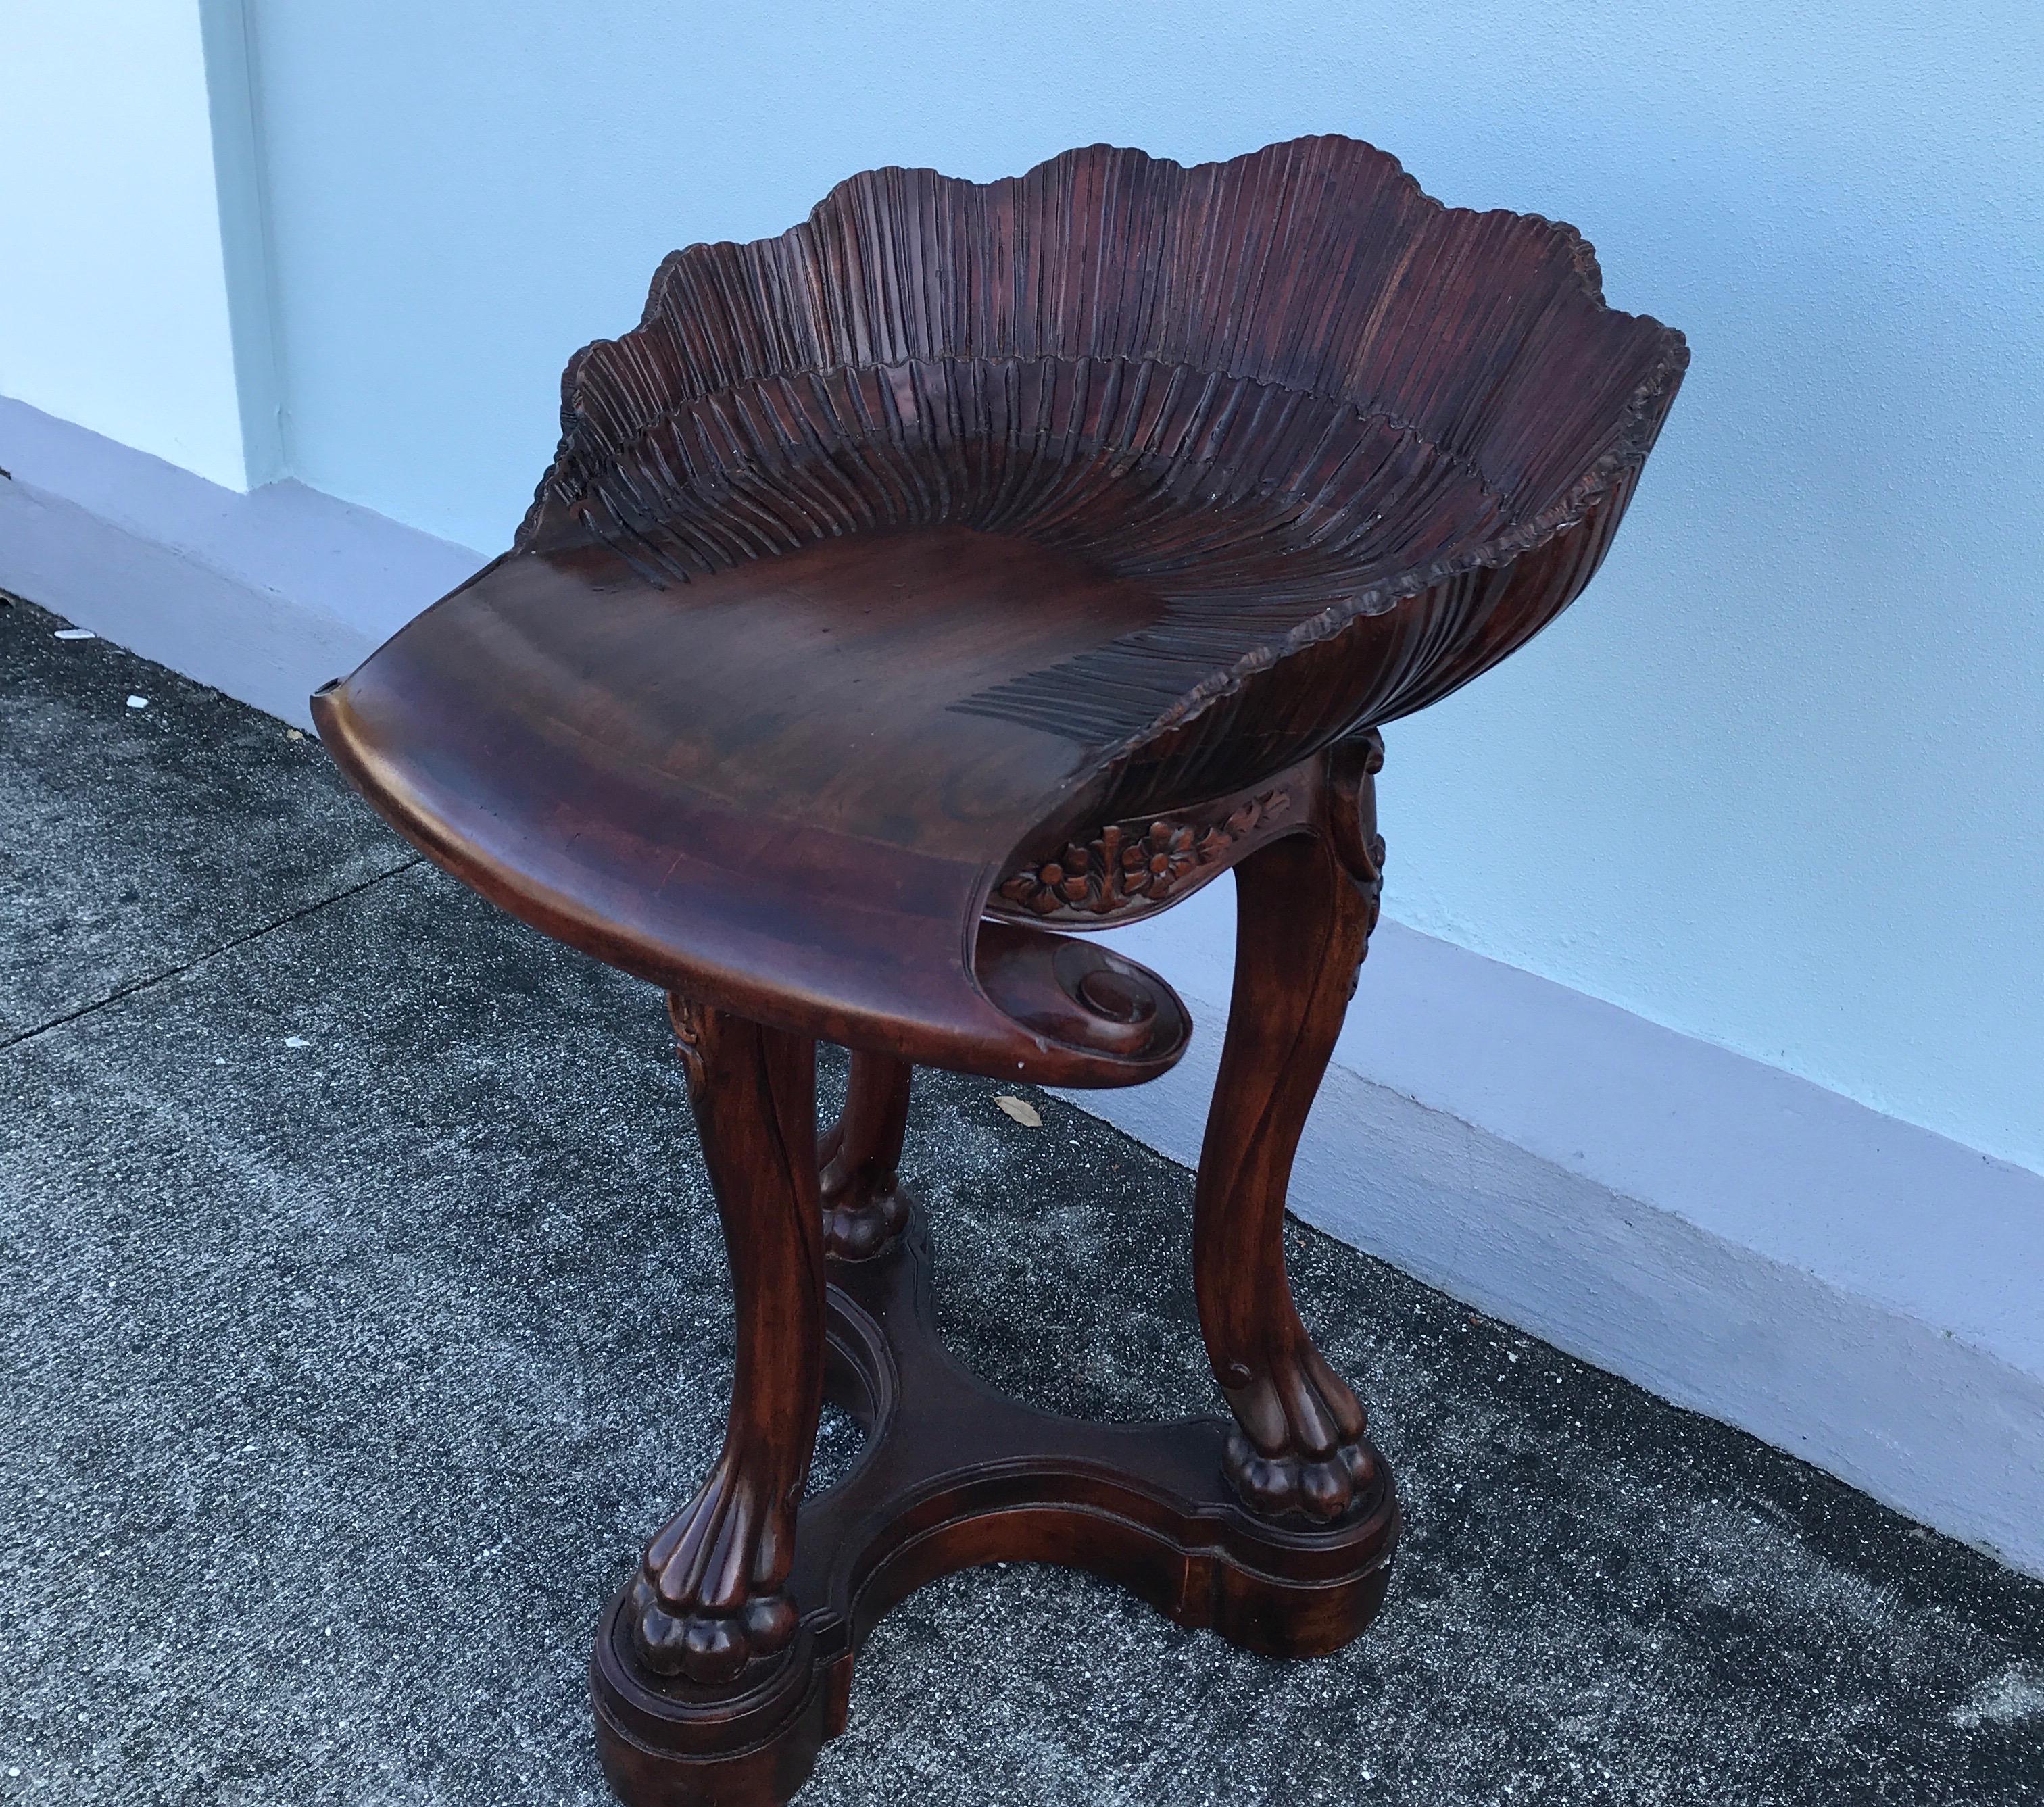 Grotto style carved wood shell stool.